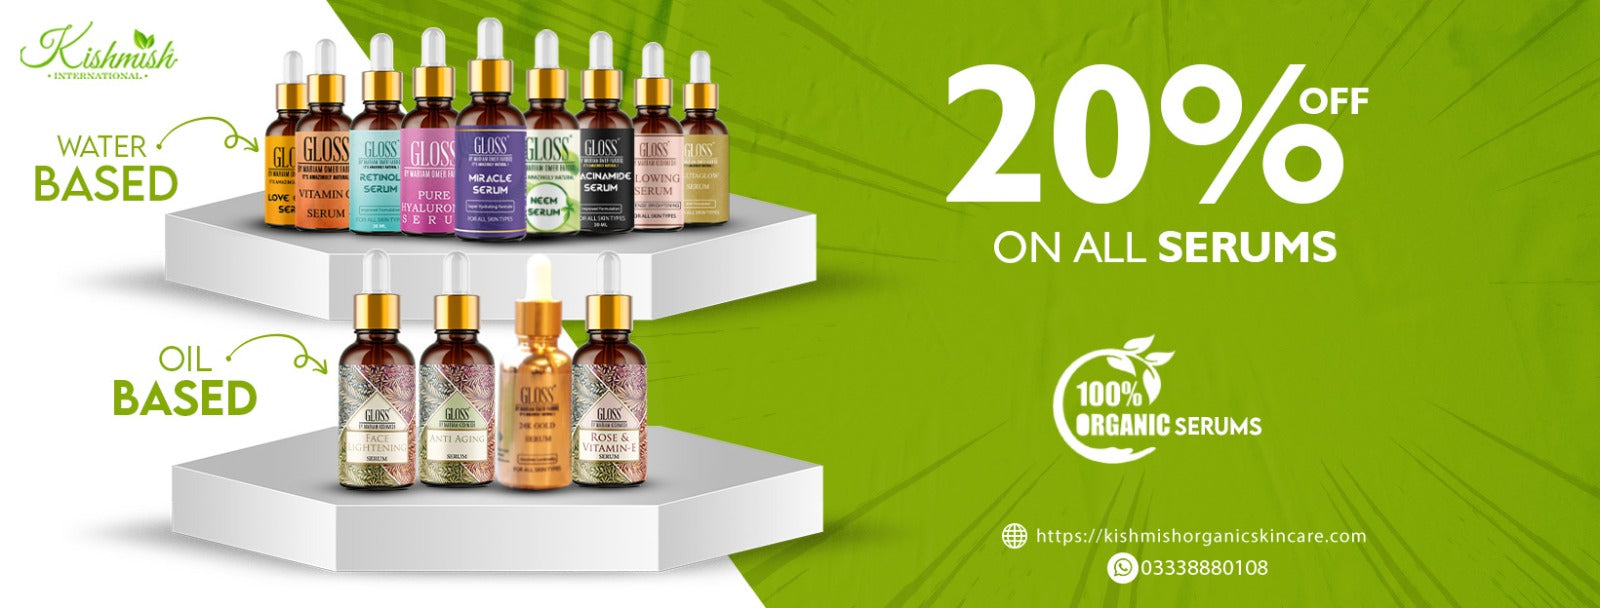 20% OFF on ALL Serums, Cleanser and Masks